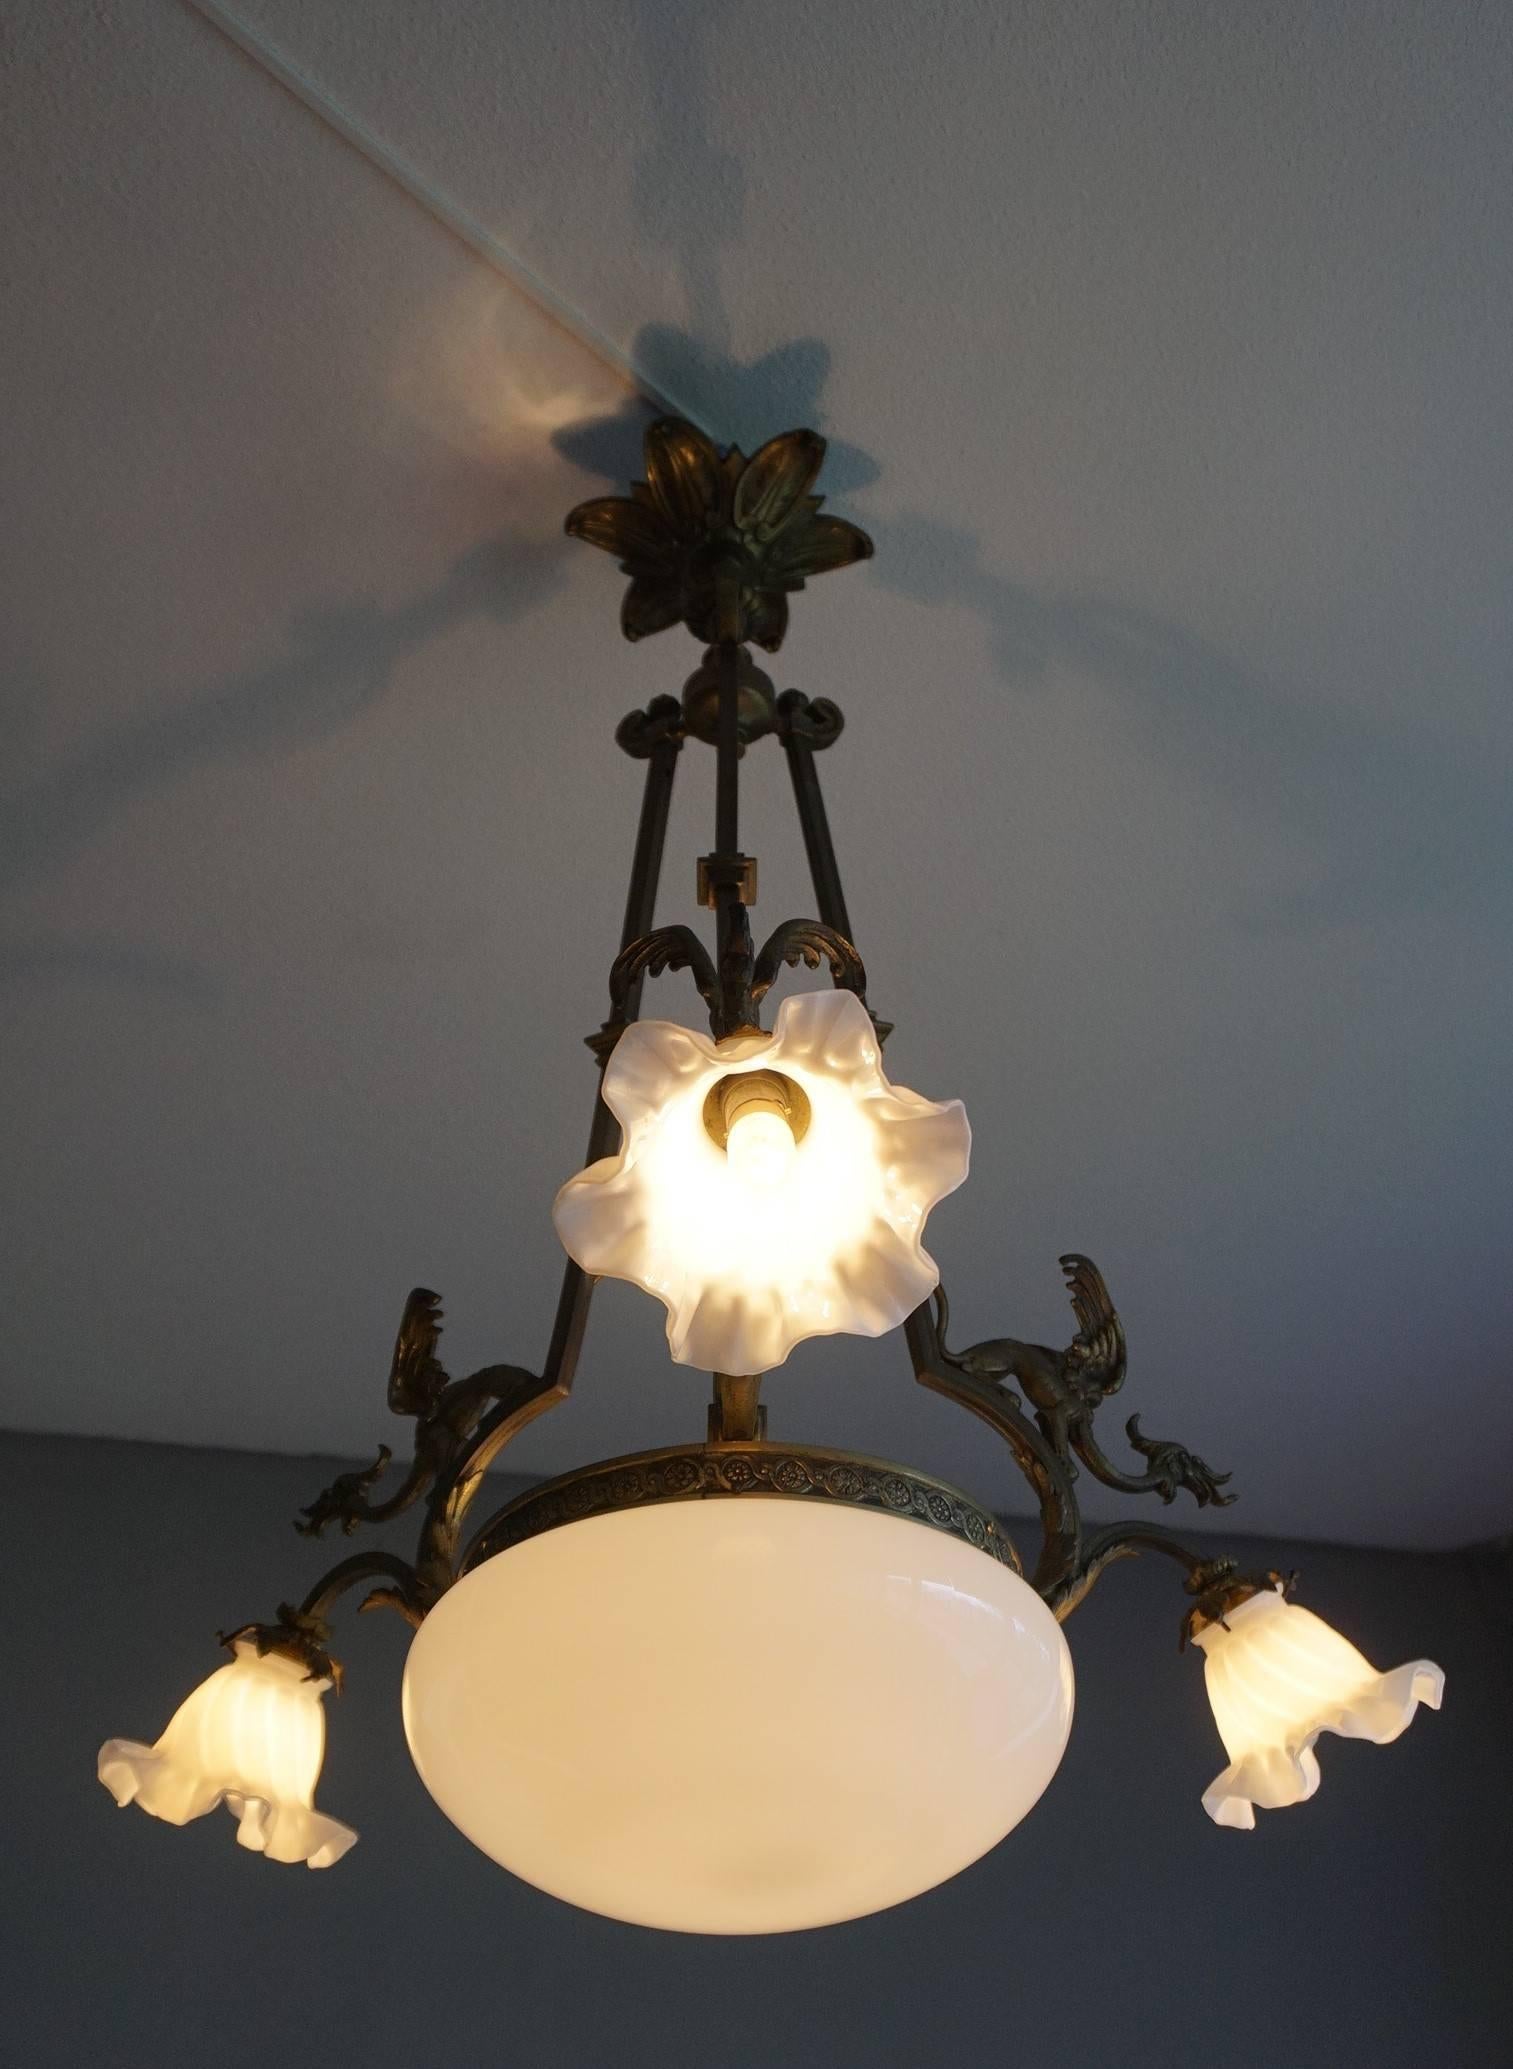 Handcrafted, turn of the century work of lighting art.

If you are looking for a practical size, quality made and perfect condition chandelier to grace your living space then this Gothic Revival light fixture could be perfect for you. It is not only